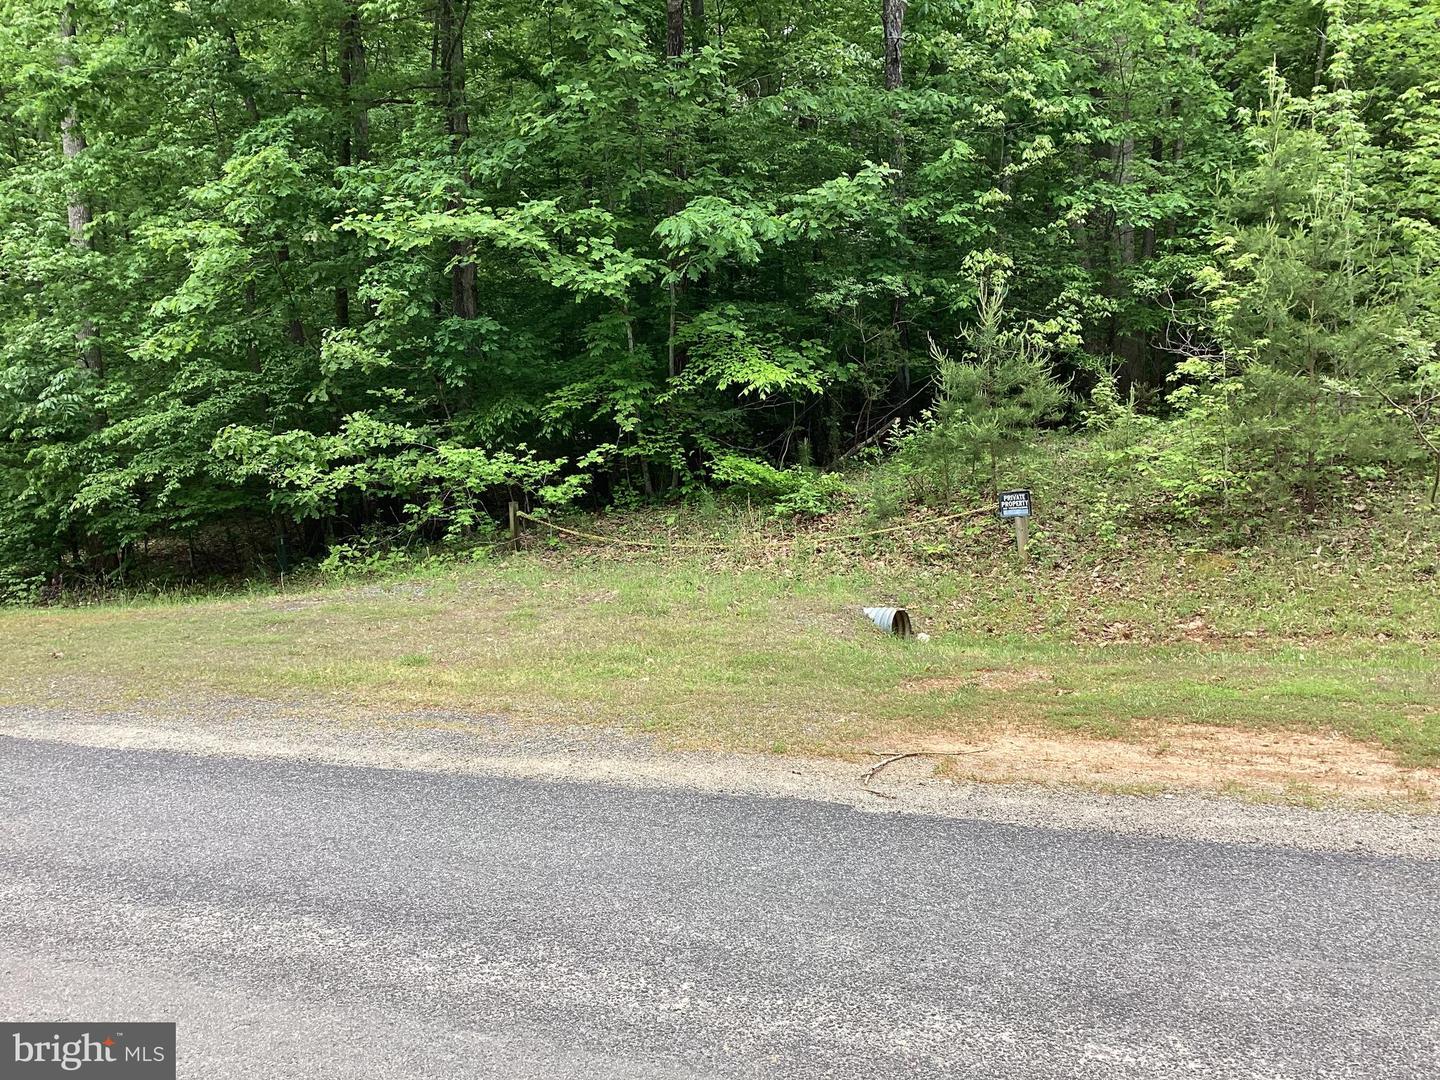 LOT 138 FISHER DRIVE, MINERAL, Virginia 23117, ,Land,For sale,LOT 138 FISHER DRIVE,VALA2005670 MLS # VALA2005670